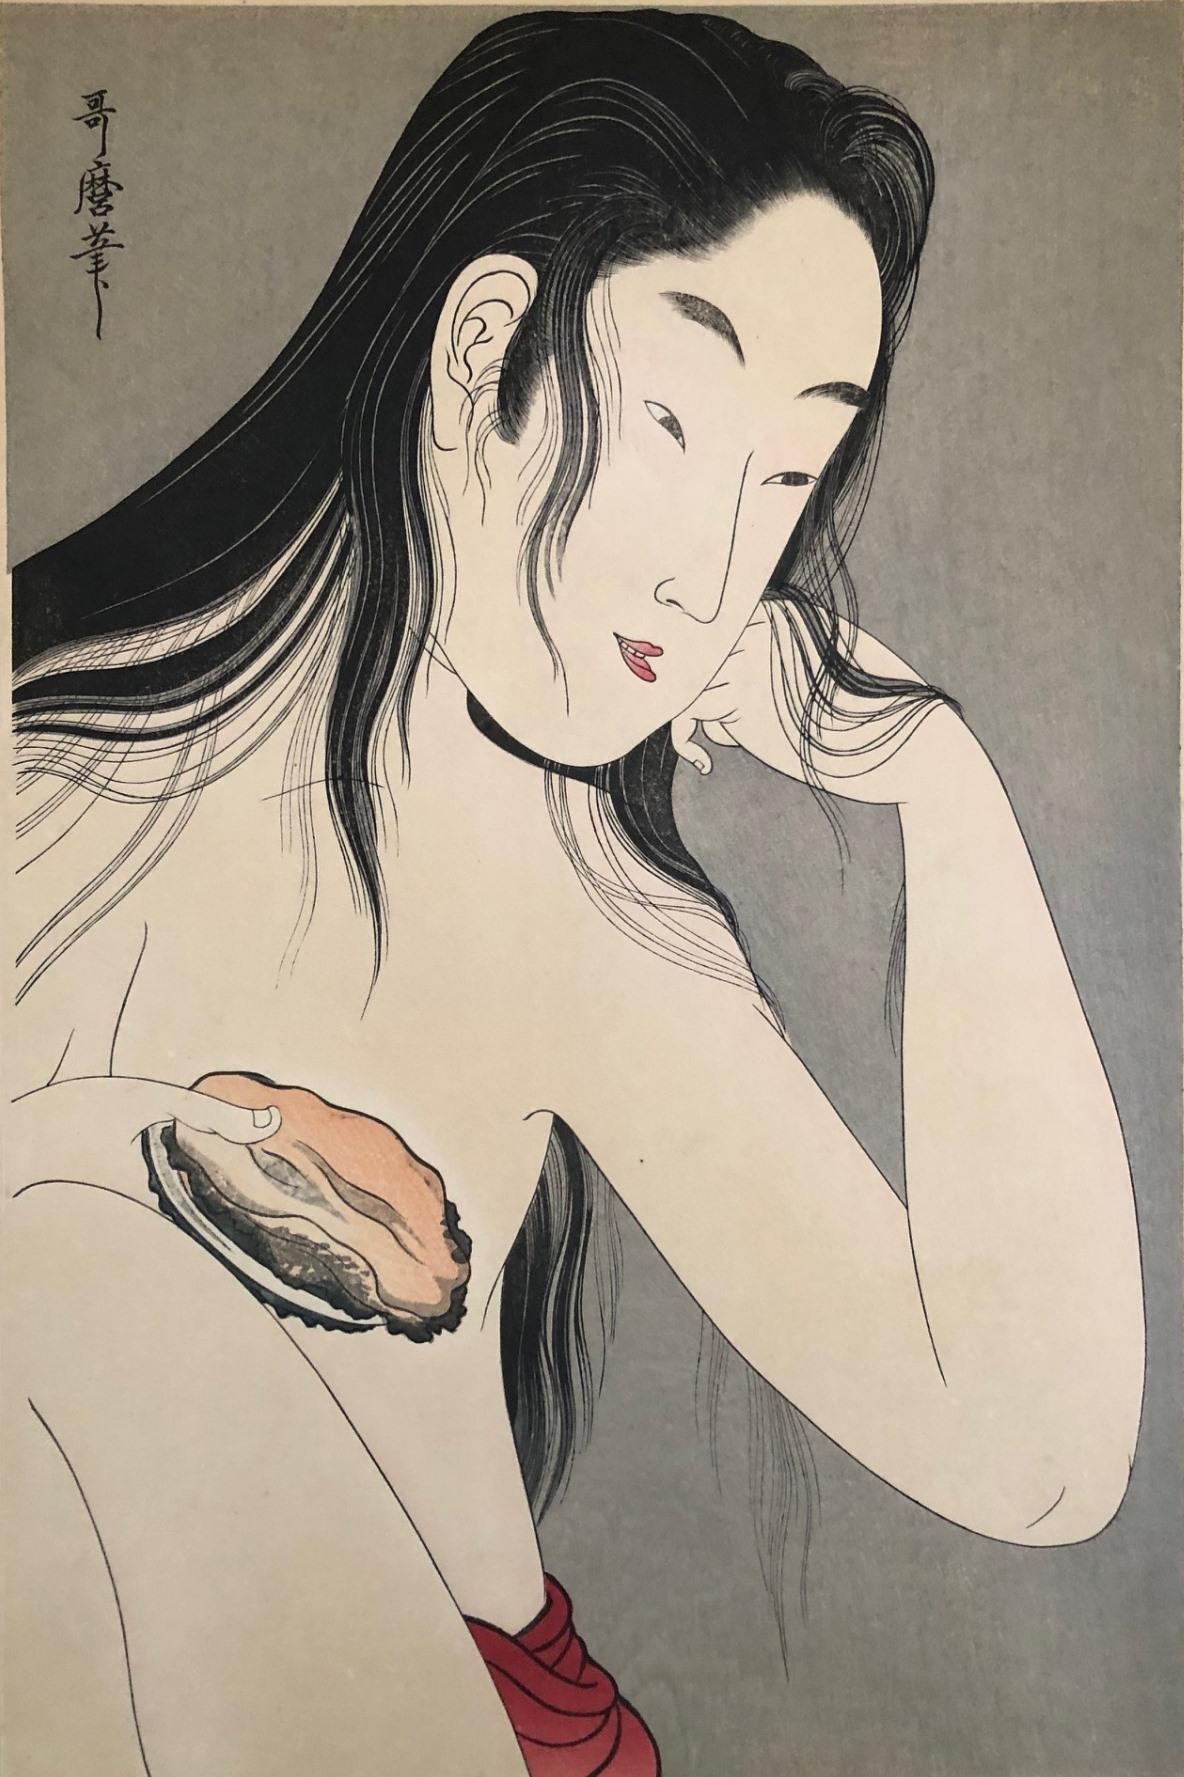 Utamaro Kitagawa – active ca. 1753-1806 
Woodblock Print
title : Awabi Diver with Shell  
date: Showa era edition 

size : oban, approx. 9.5 x 14.5 inches

Note : Utamaro Ktagawa (1753-1806) was a Japanese print maker and painter, and is considered